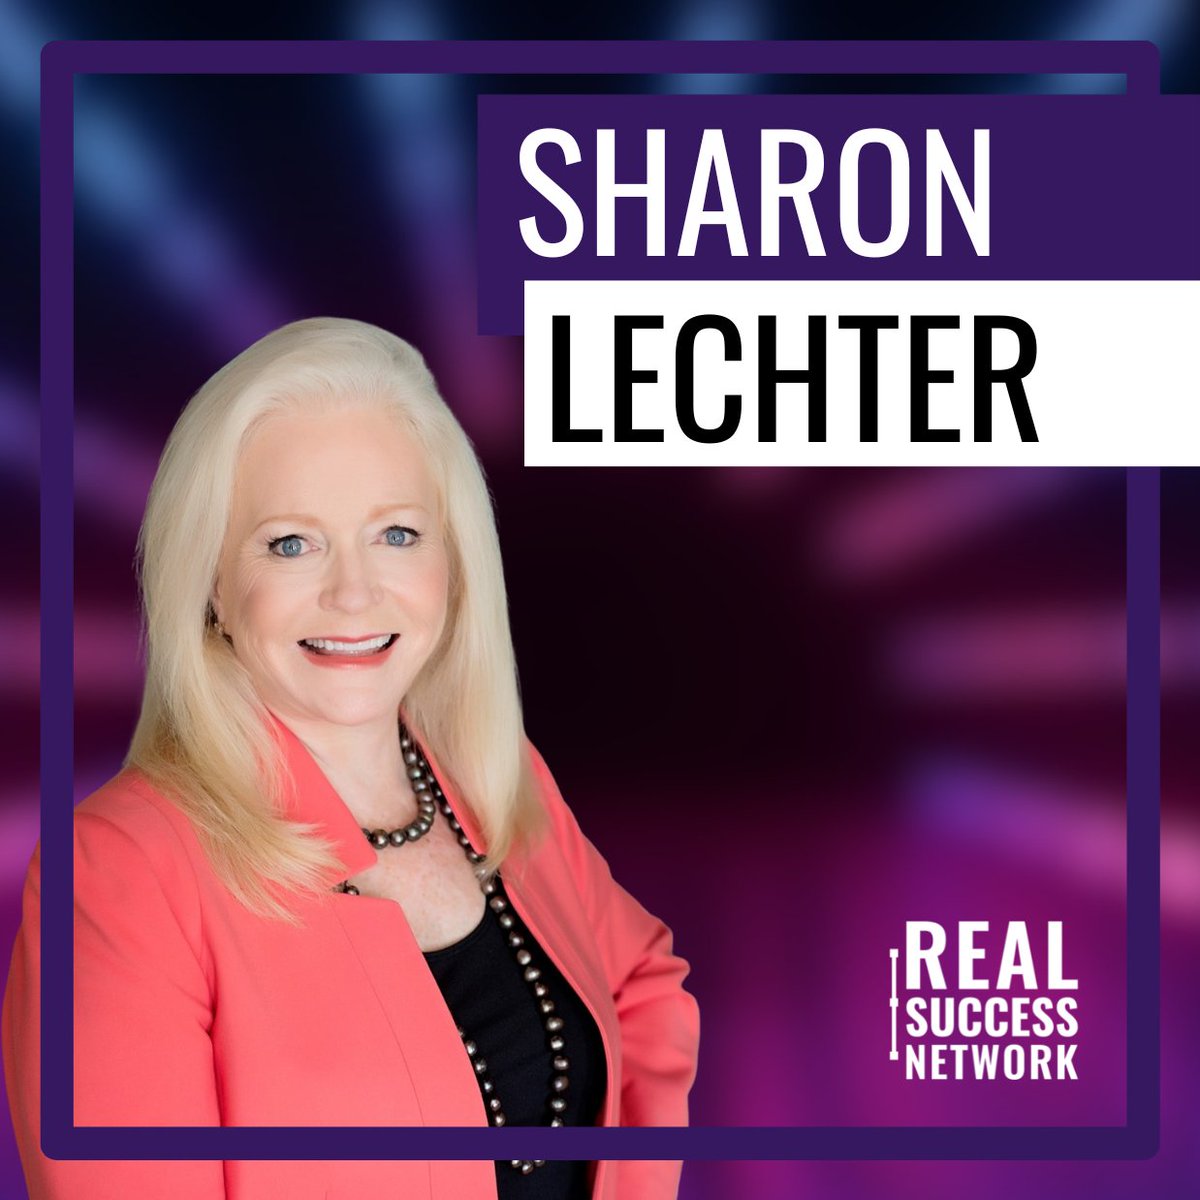 REFIRE
Join Sharon Lechter's Masterclass 27th March 2023 to learn how to refire your life.
TIME: 12.00PM EST/ EDT
FREE ACCESS
BOOK HERE NOW: go.realsuccess.network/sharonmc
#realsuccess #success  #networking #buildwealth #yournetworkisyournetworth  #cashmoney #billionairemindset